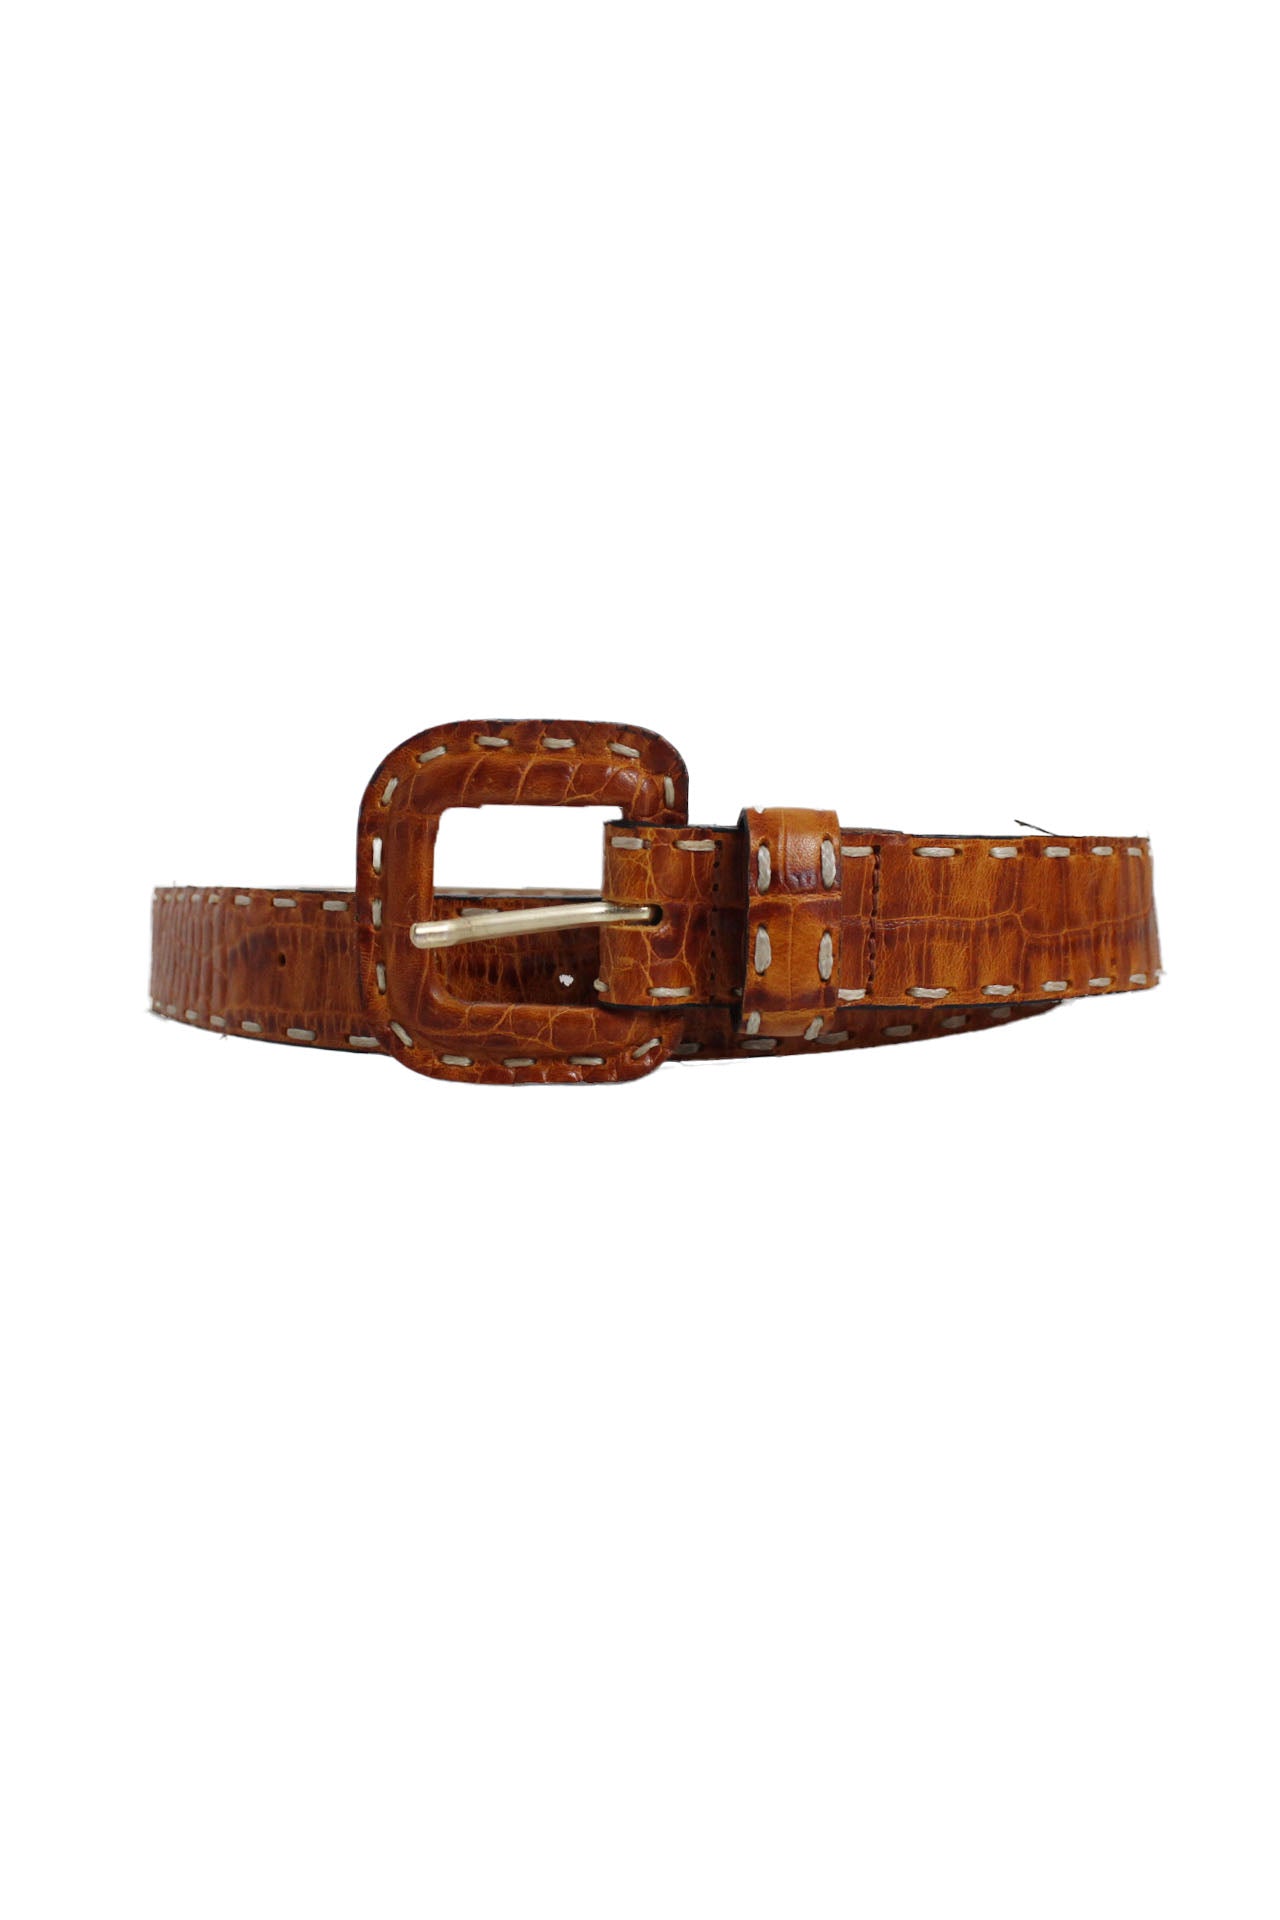 front angle of vas and crafts golden brown reptile leather belt. features white outstitching and leather covered buckle with gold toned hardware. 